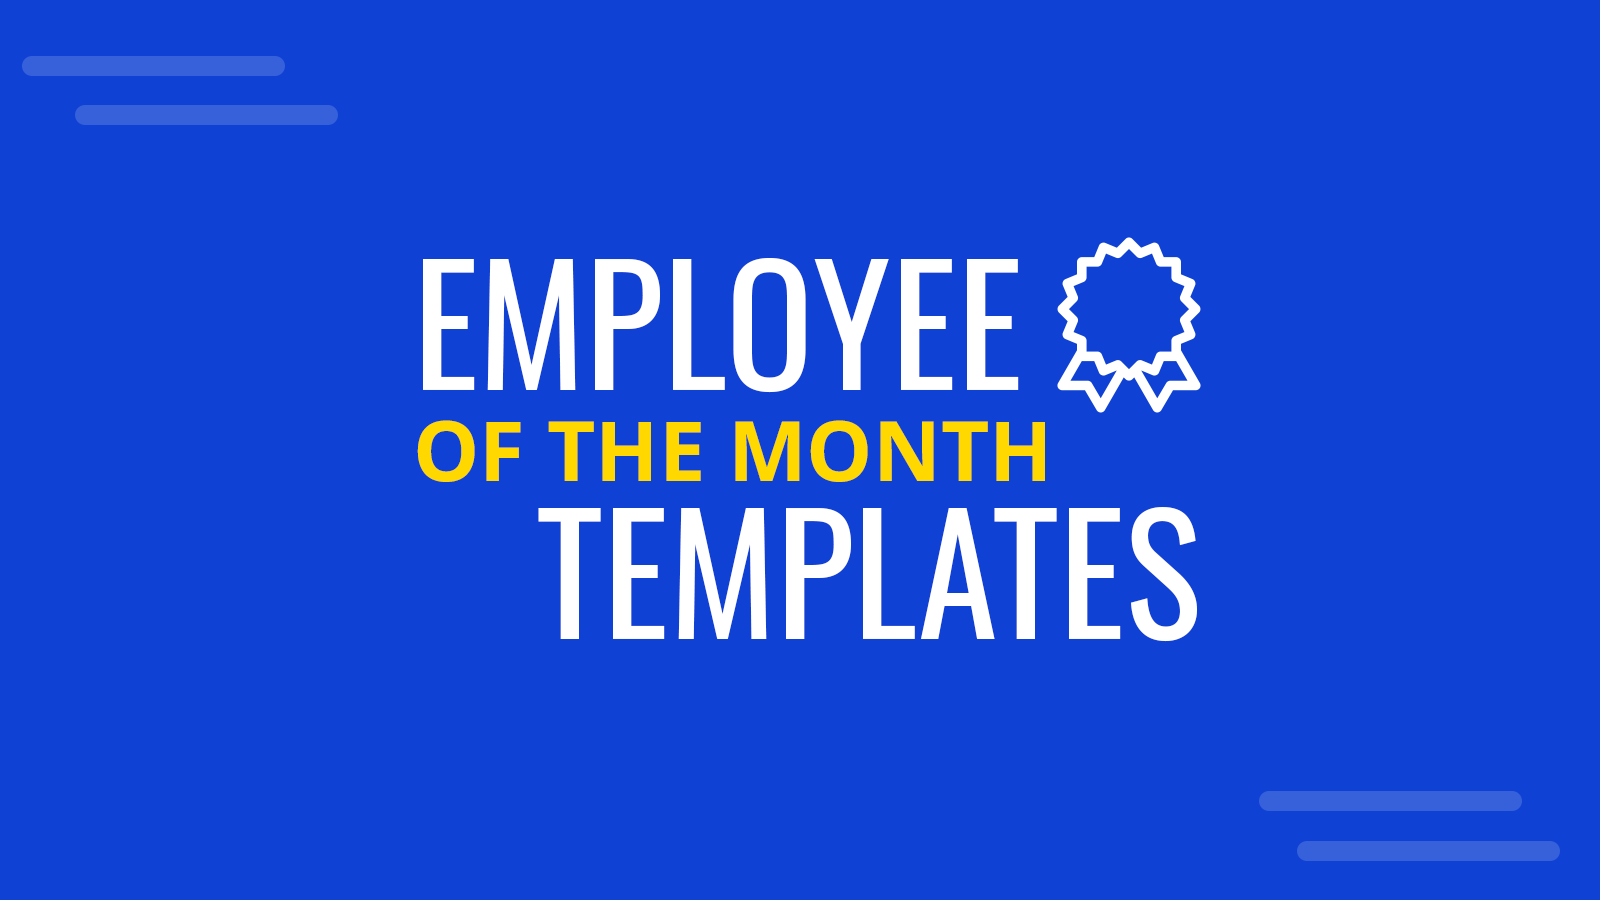 Free Employee of the Month Template for Employee Recognition in PowerPoint